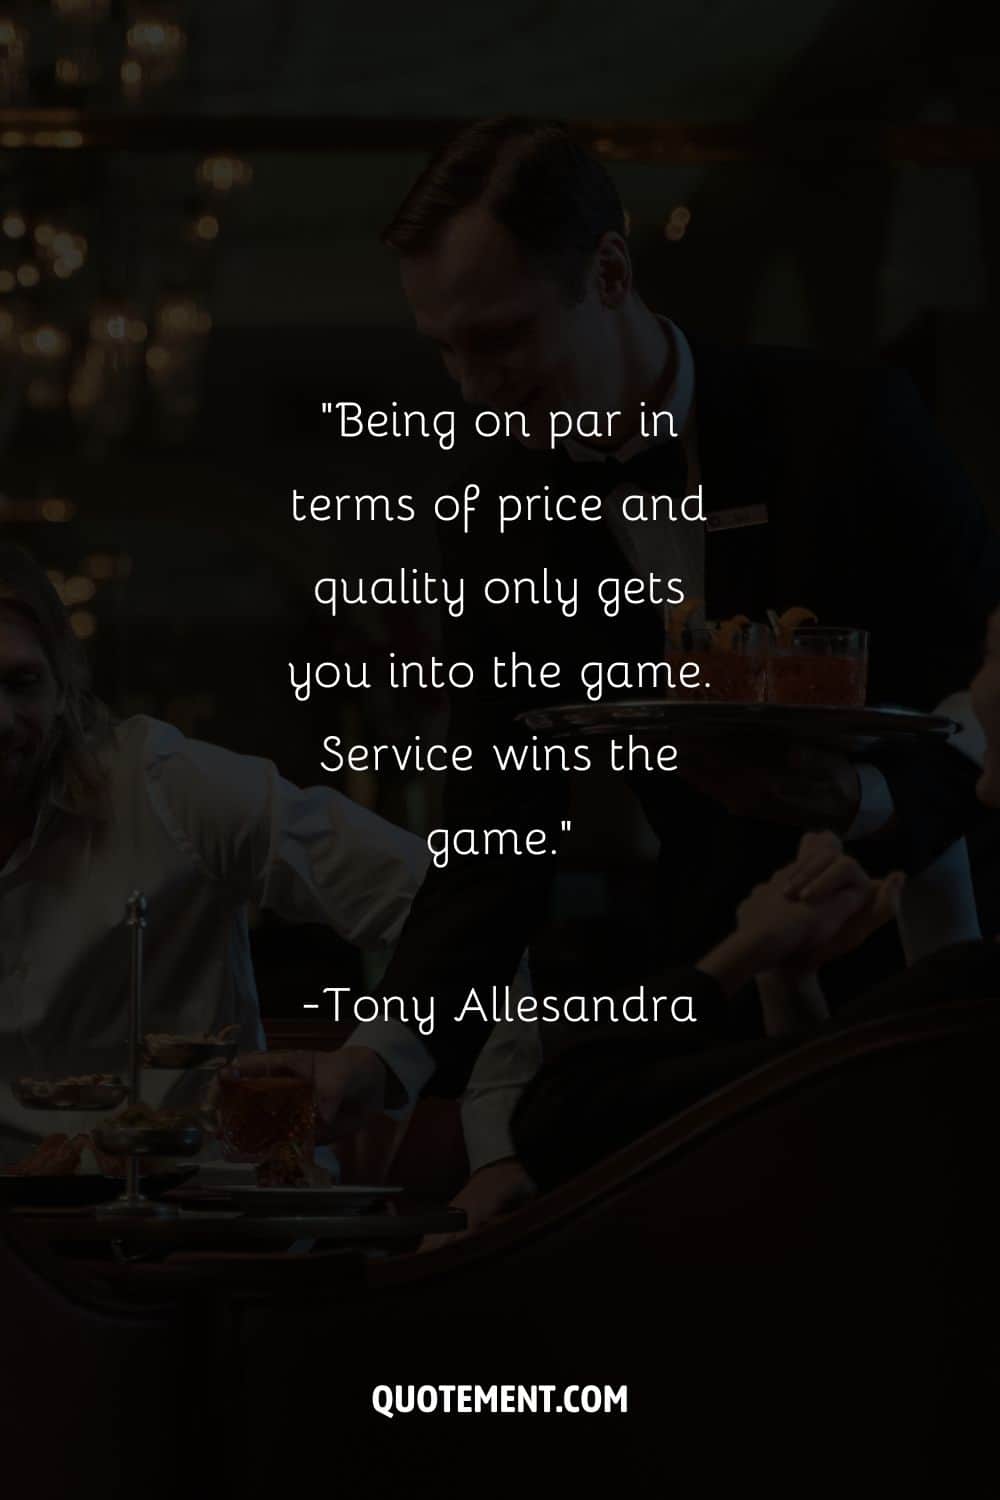 Image of a waiter serving a table representing a quote about service